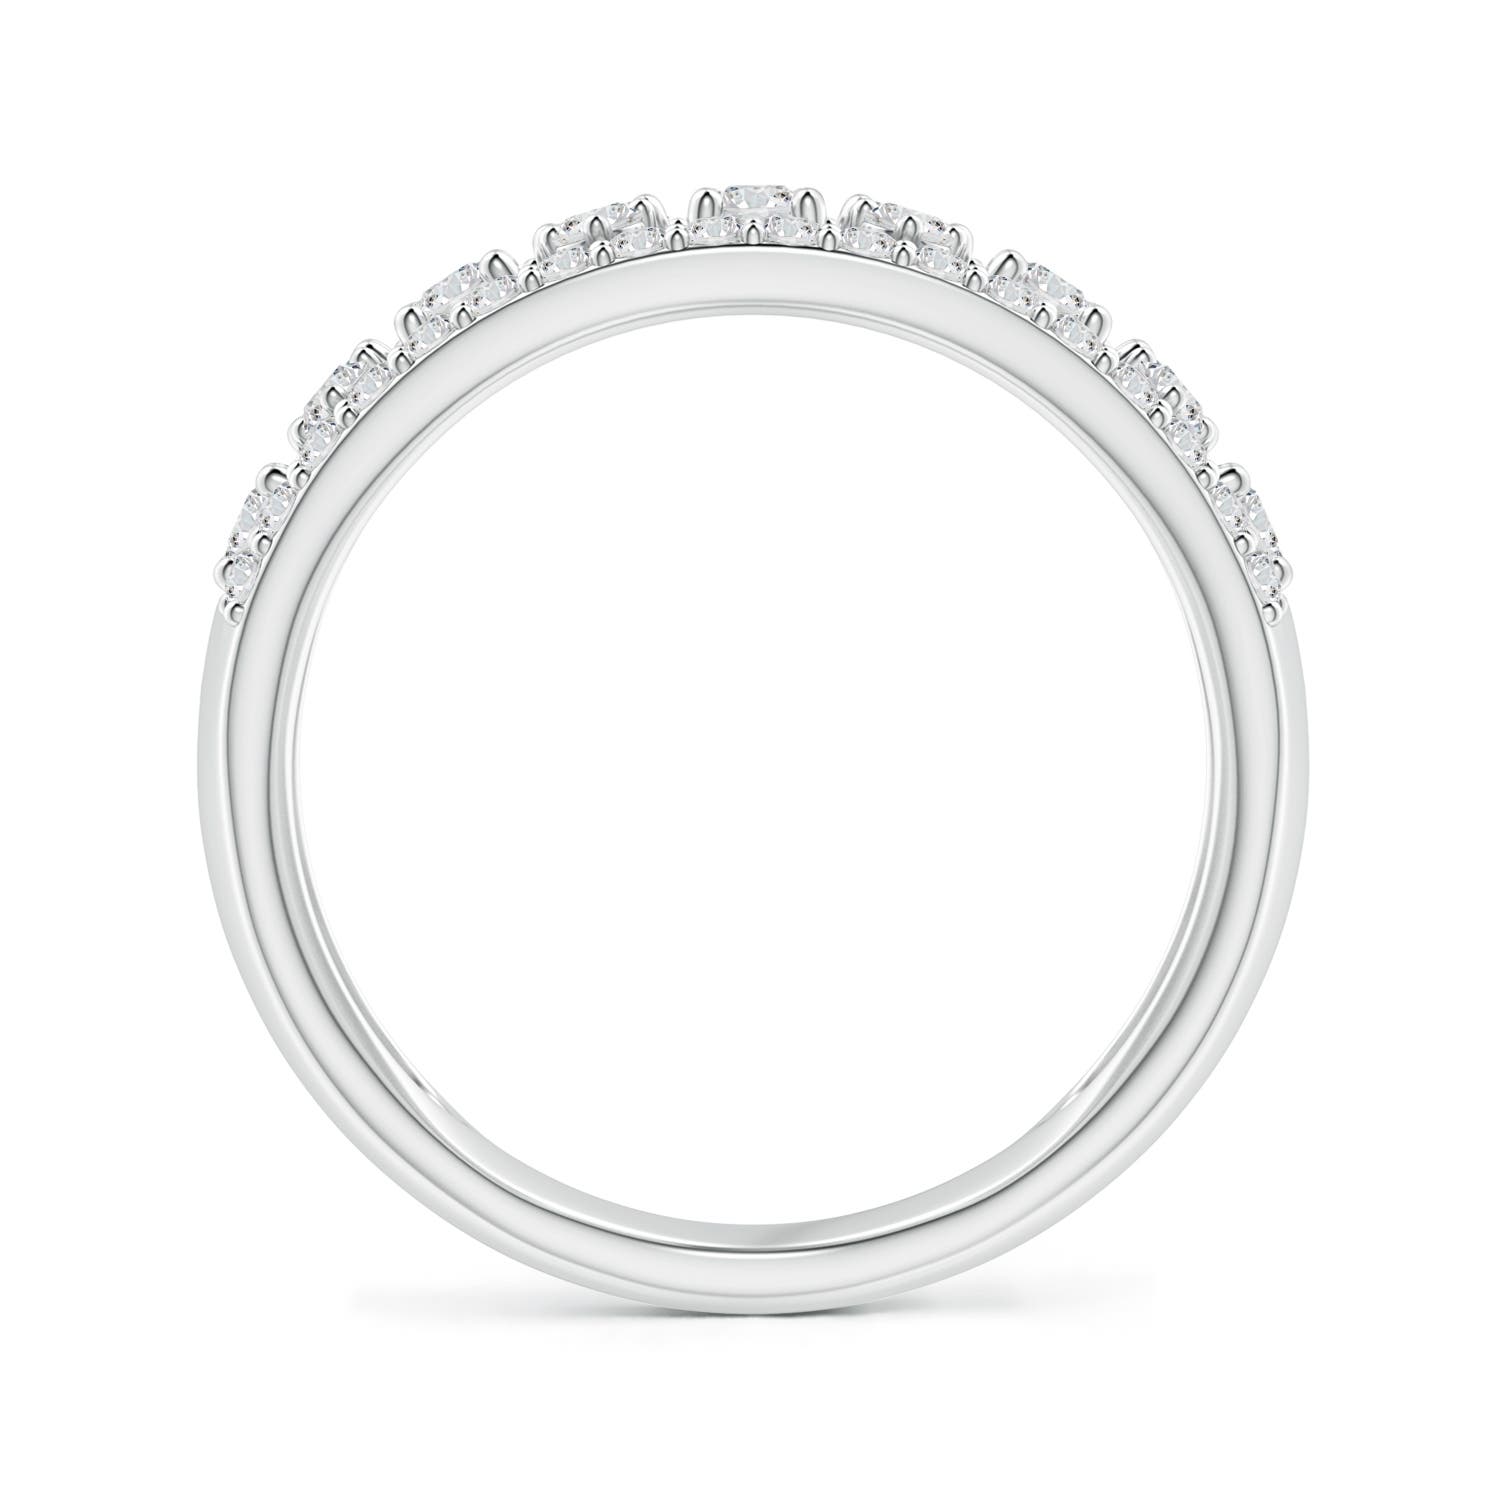 H, SI2 / 1.19 CT / 14 KT White Gold